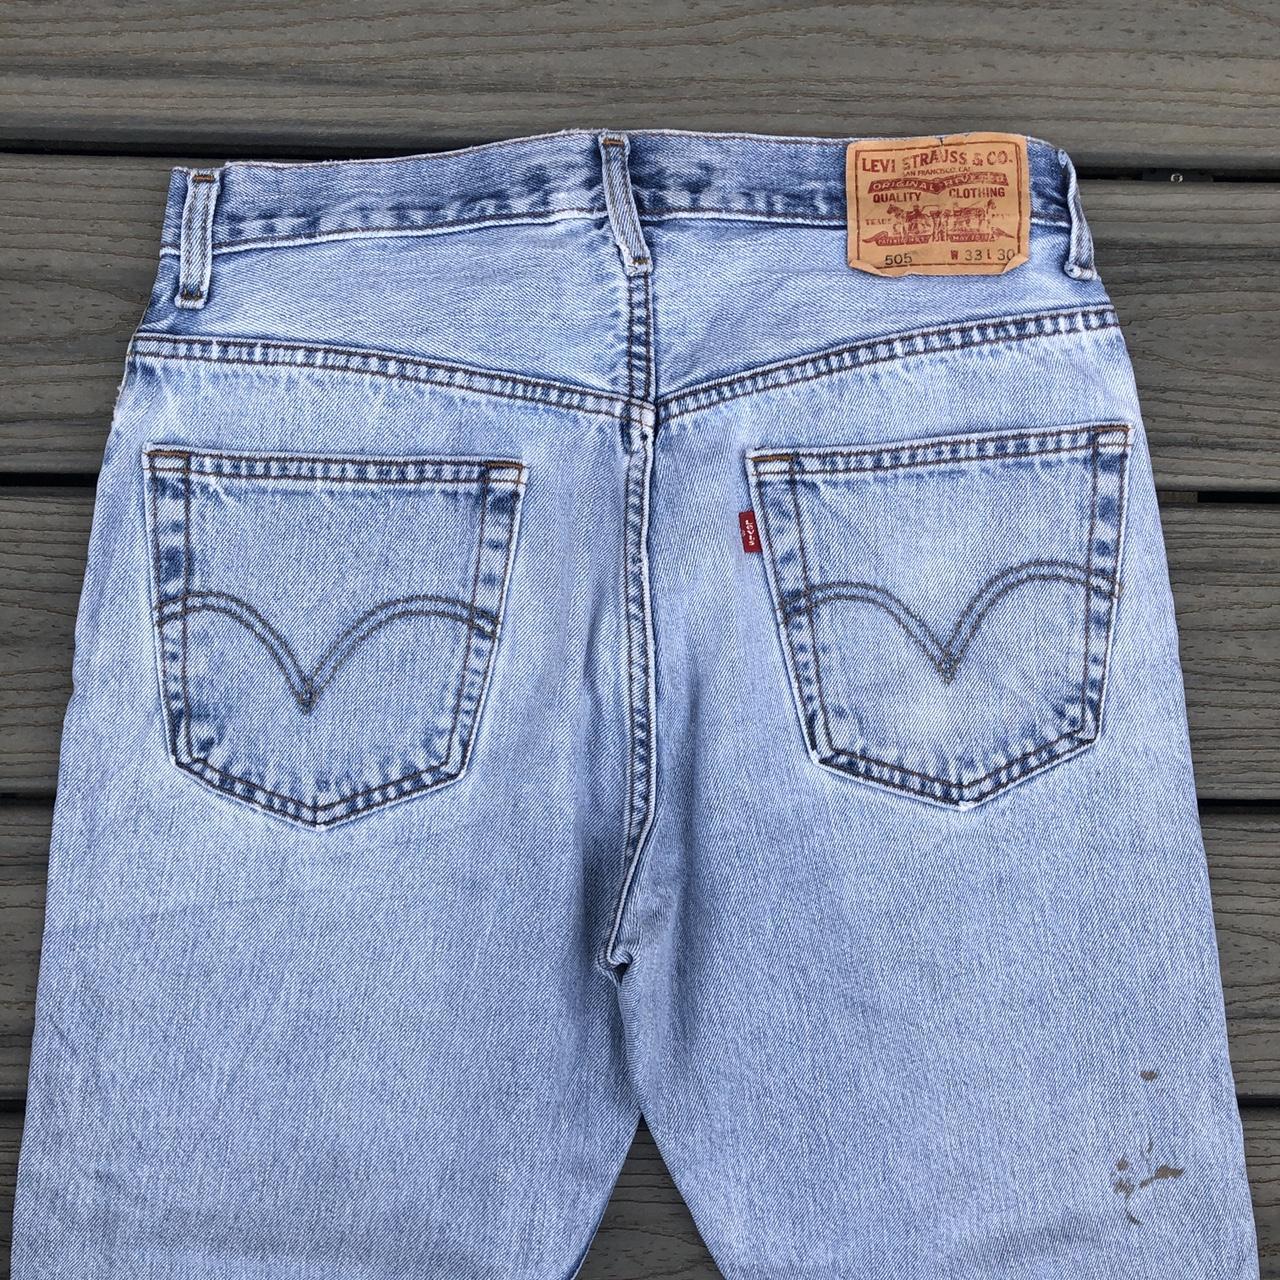 Levi’s 505 Straight Fit Jeans in Light Blue / Stone... - Depop